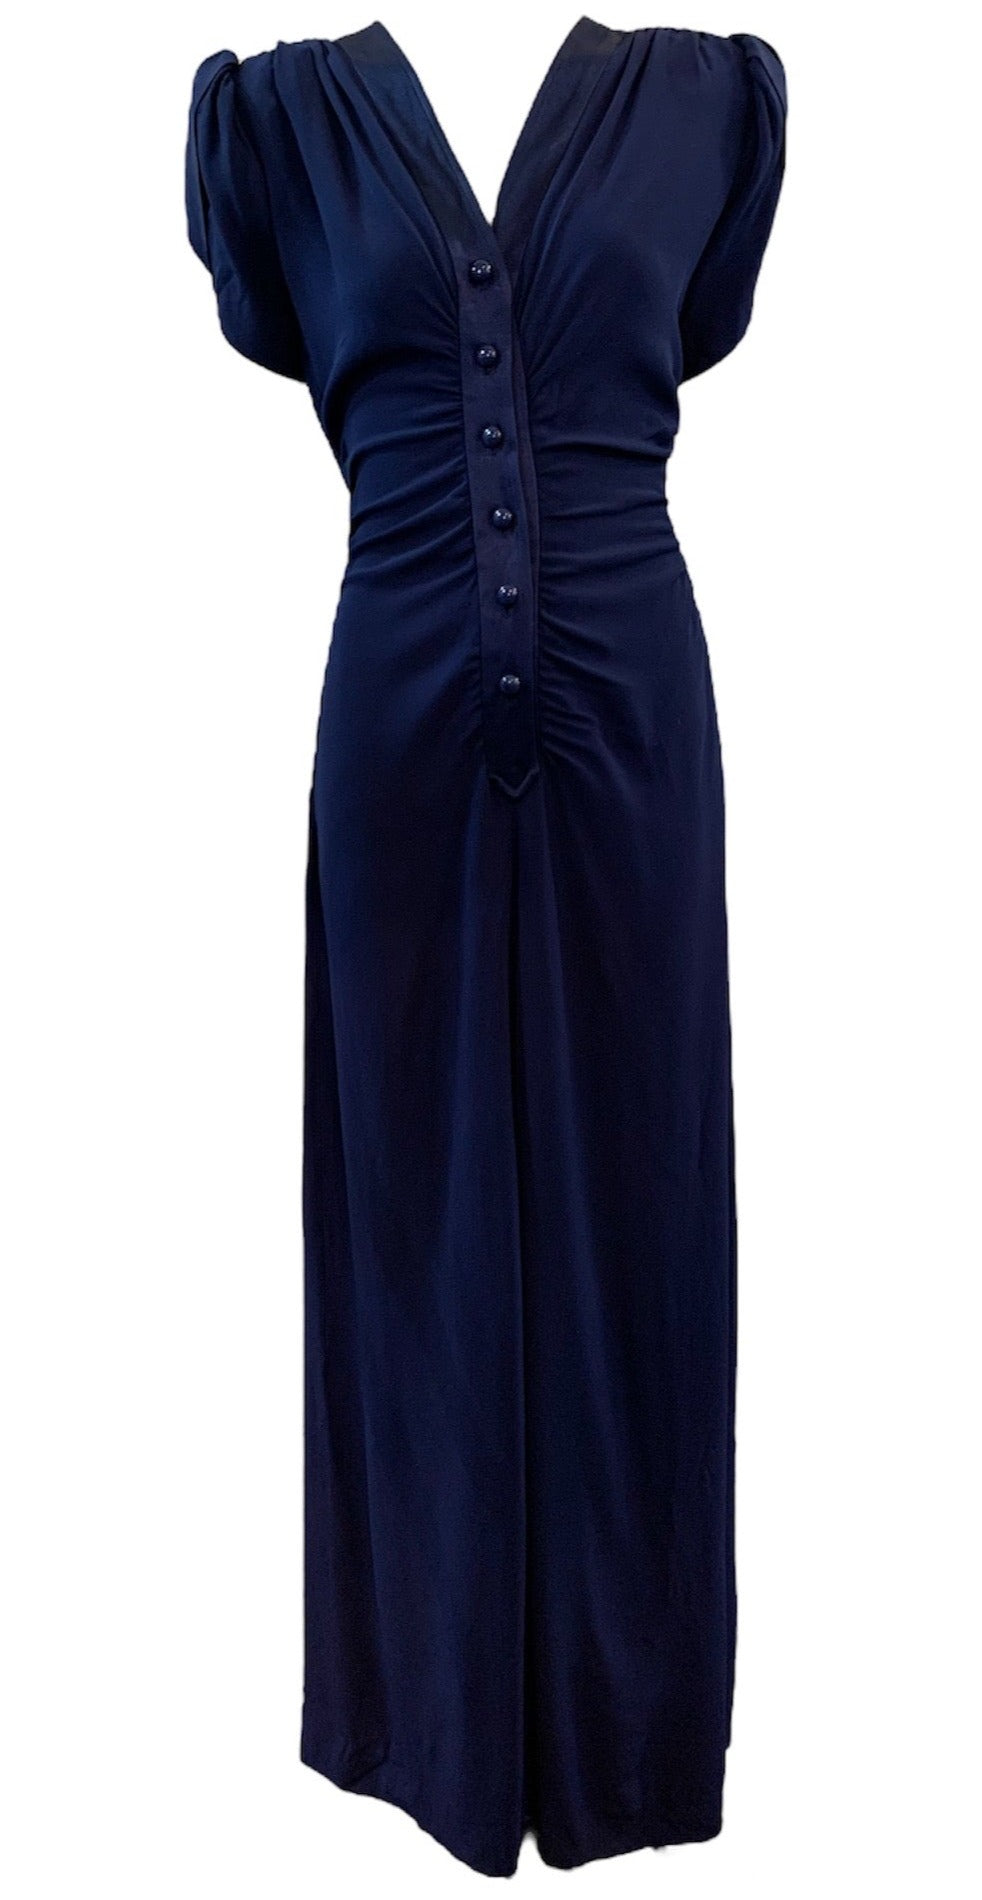 YSL Rive Gauche Blue Satin Backed Crepe 70s Look Maxi Dress FRONT 1 of 5